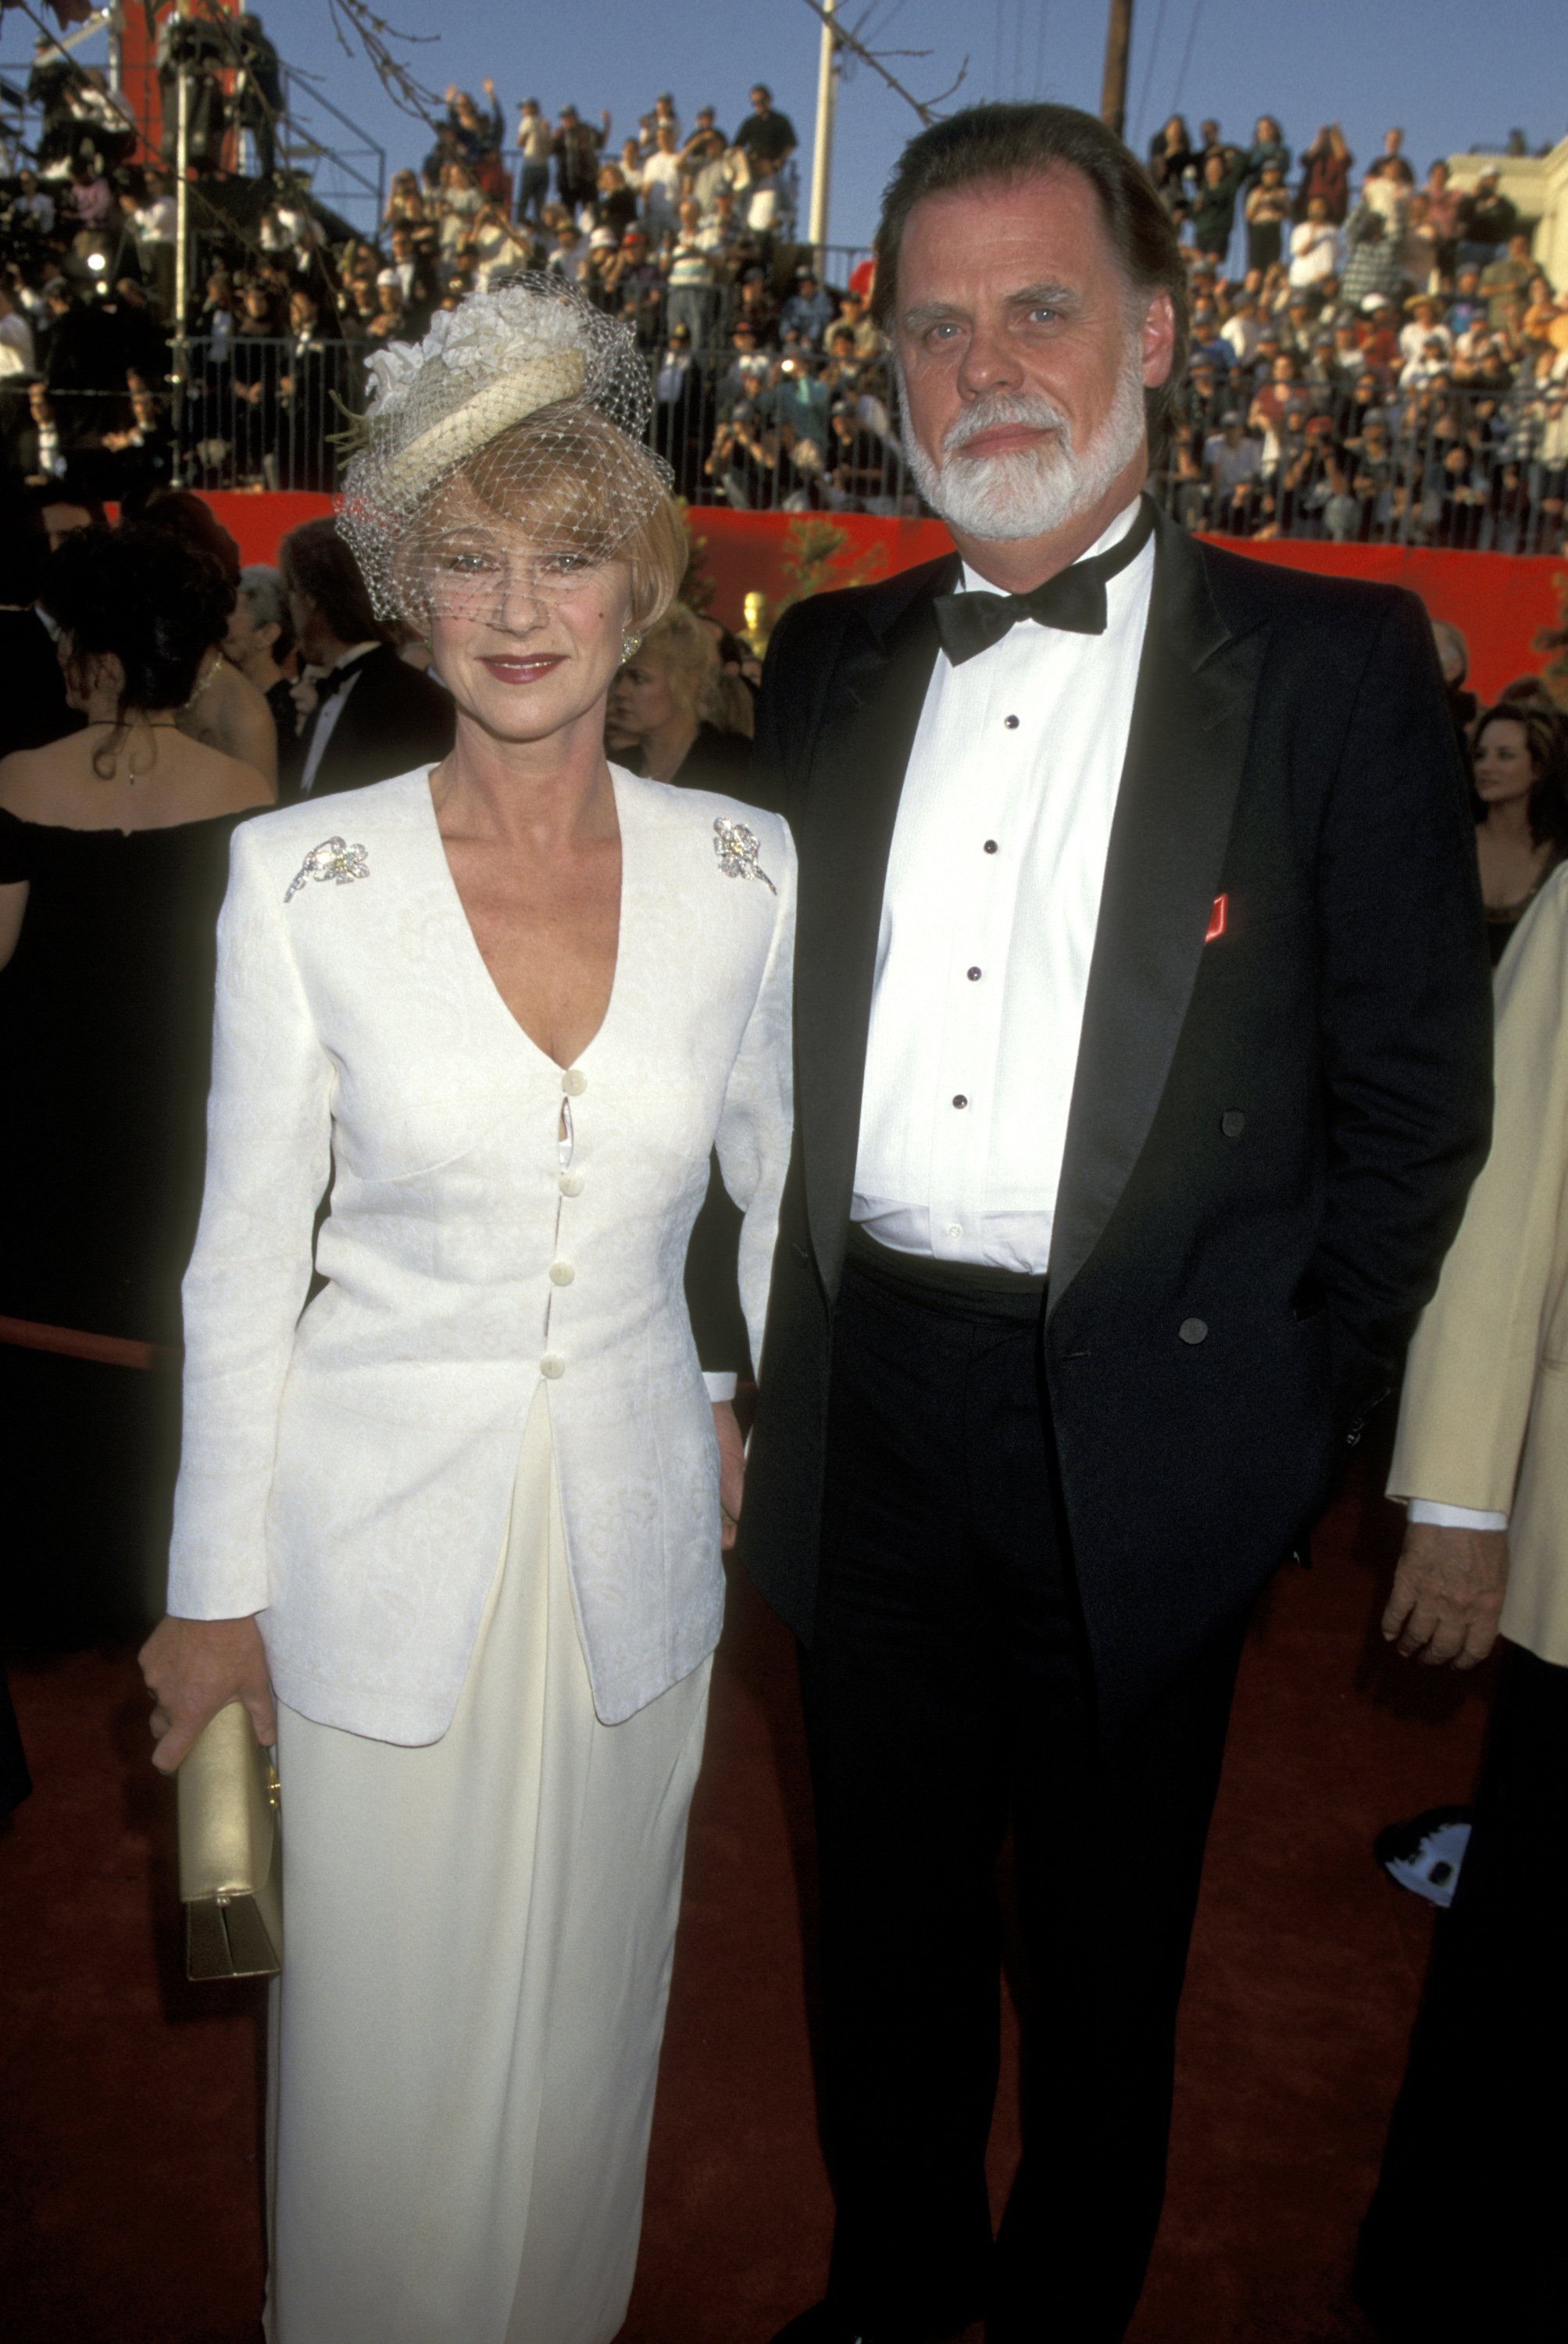 Helen Mirren and Taylor Hackford atThe 67th Annual Academy Awards - Arrivals at Shrine Auditorium in Los Angeles, California, United States. | Source: Getty Images